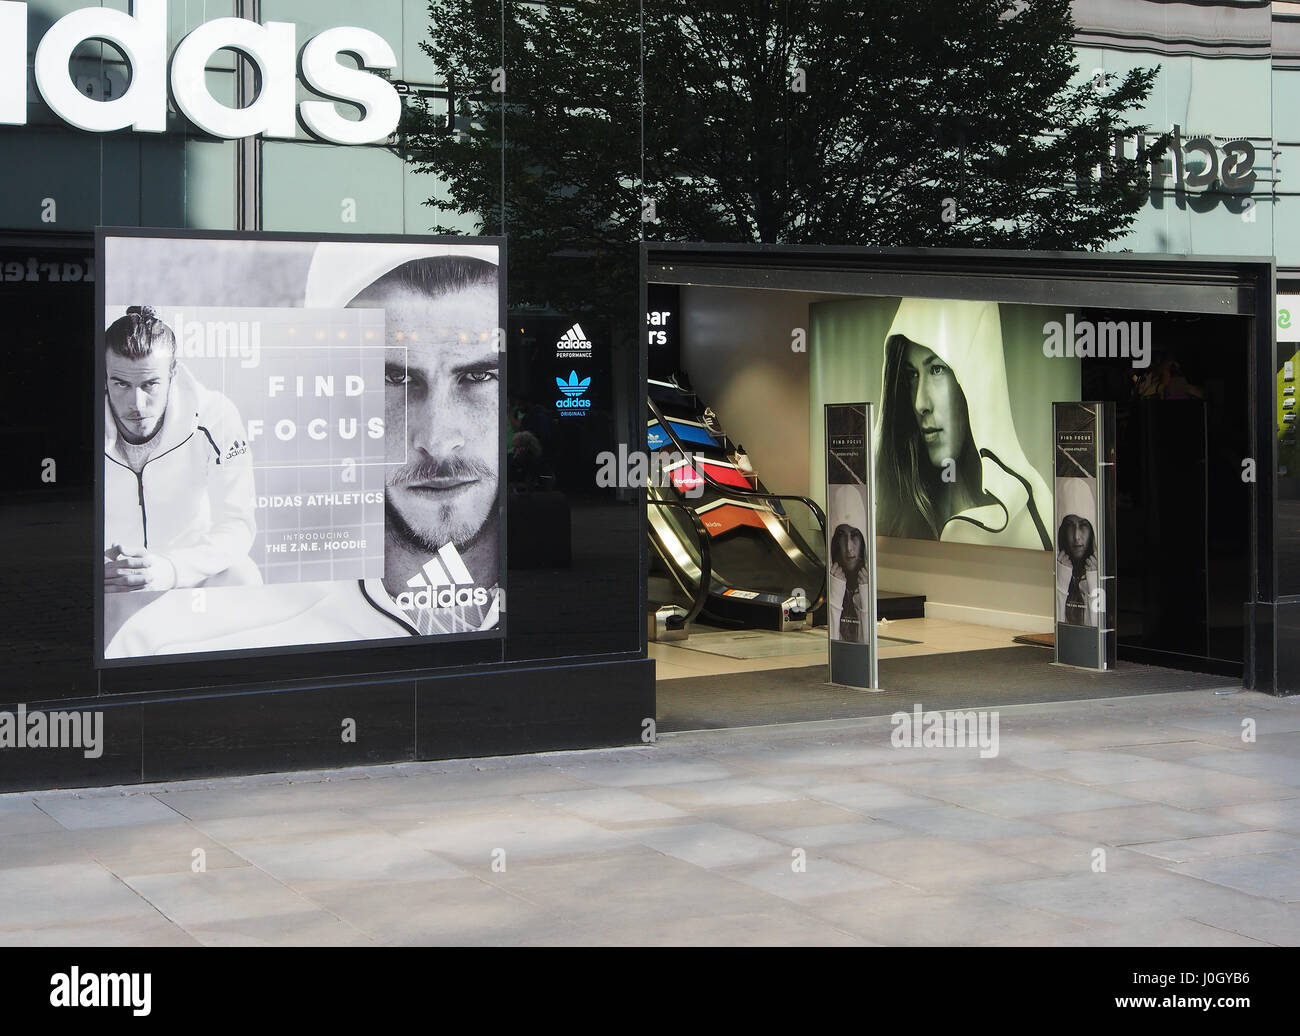 Exterior shot of the Manchester city center centre Adidas sports clothing high  street shop shops showing the window display with David Beckham Stock Photo  - Alamy